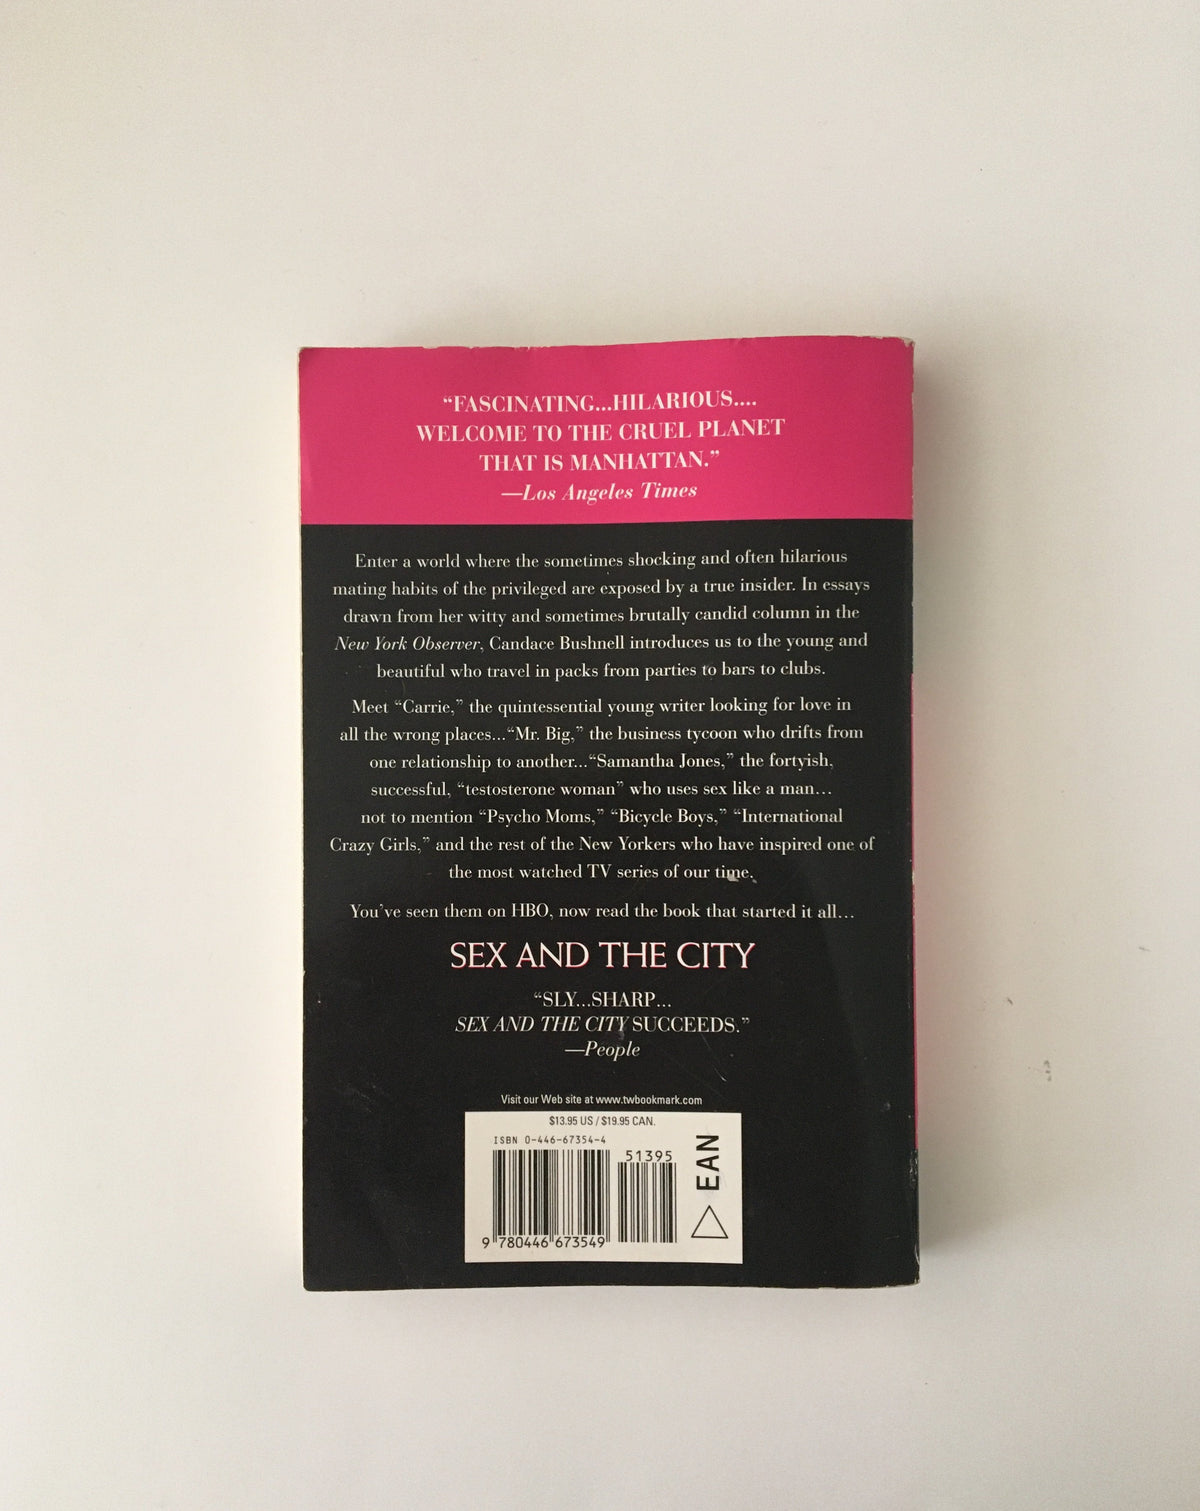 Sex and the City by Candice Bushnell